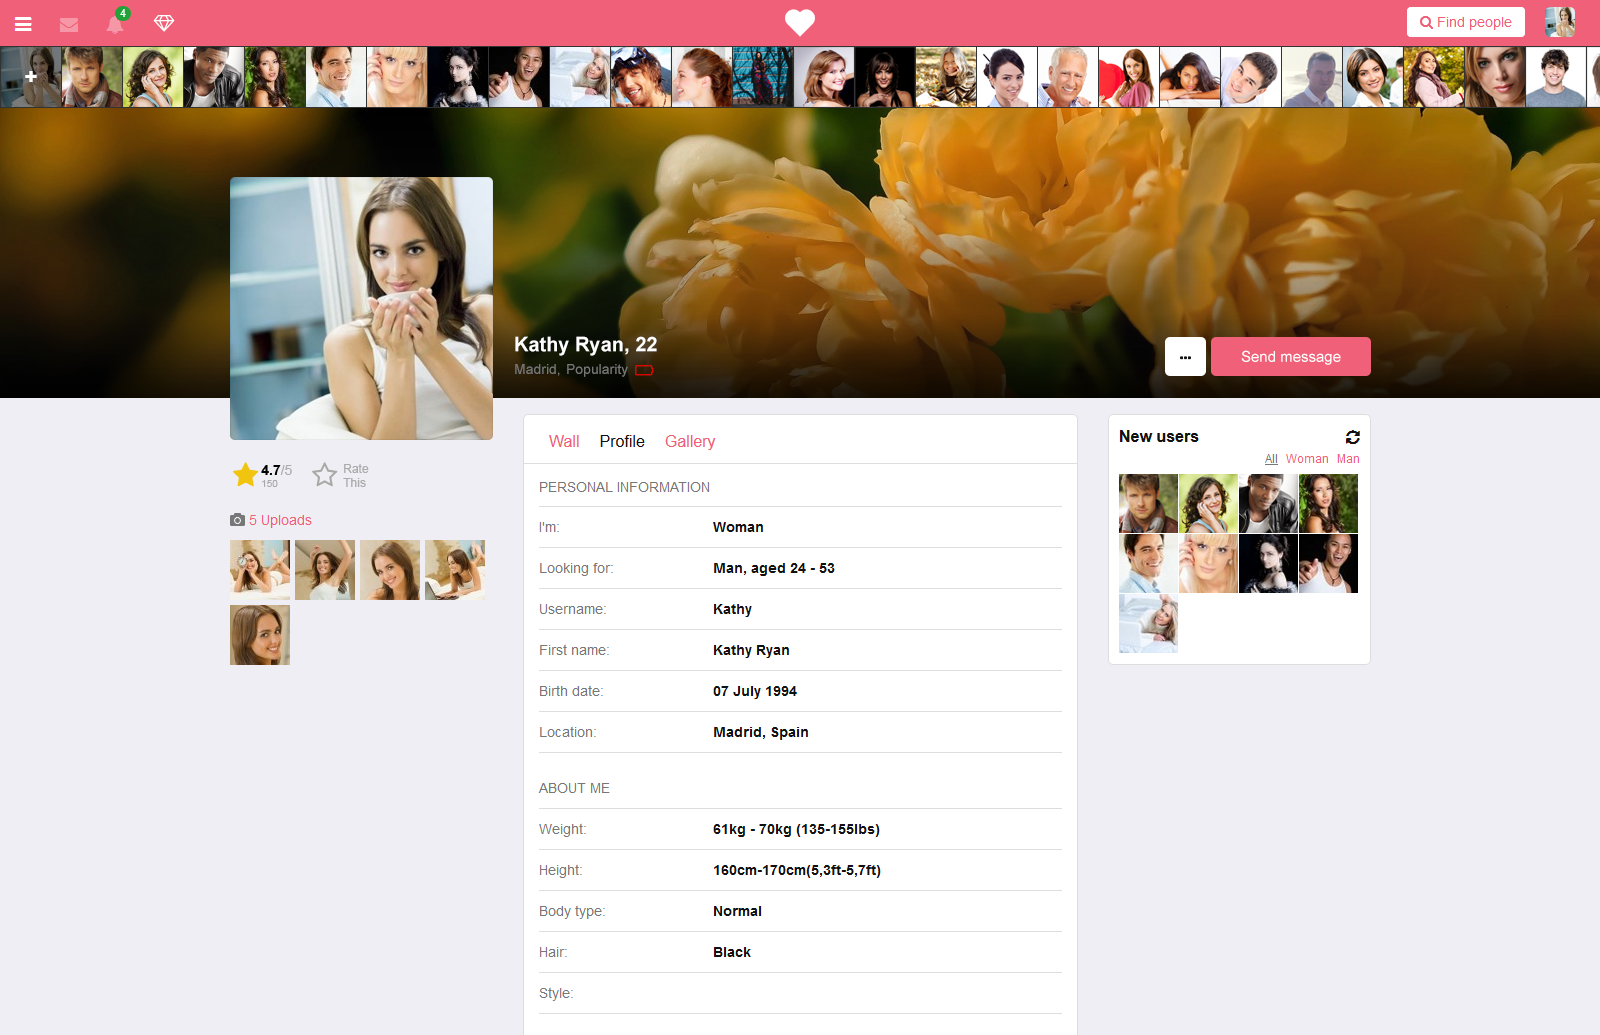 Cover Photo – Special background pic on the user profile page